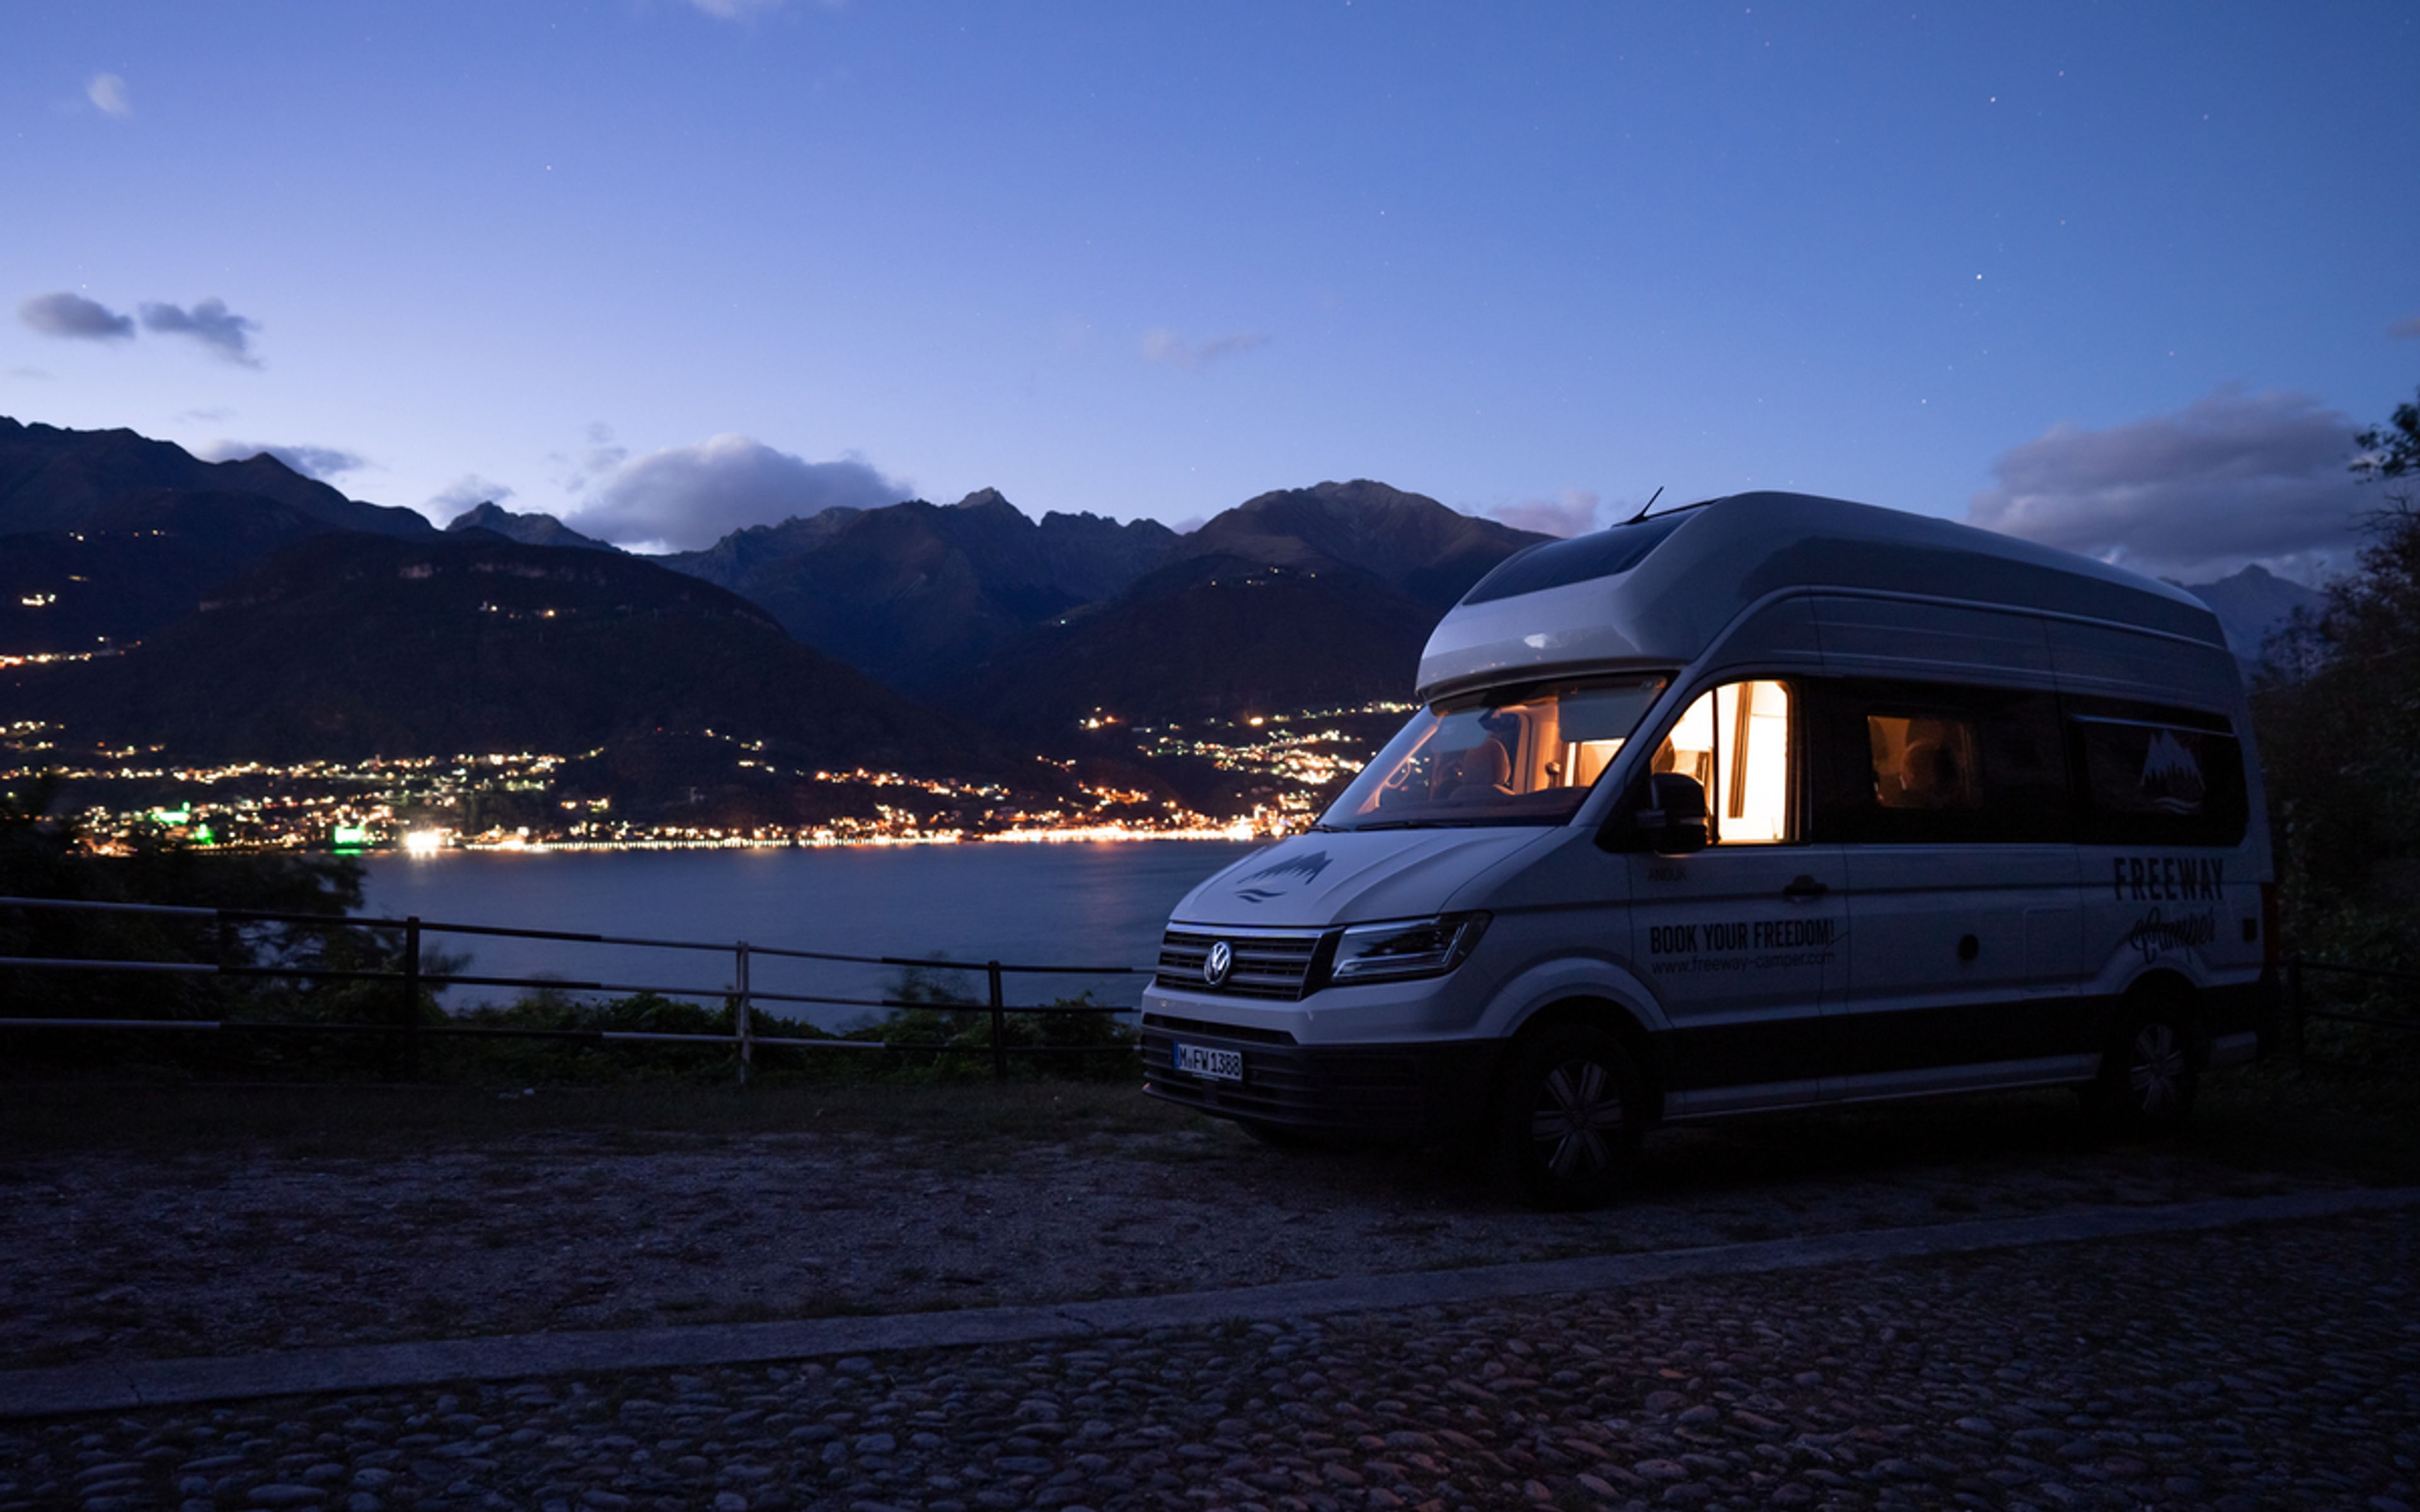 VW Grand California parks at night on the side of the road in Italy overlooking a city by the lake filled with lights